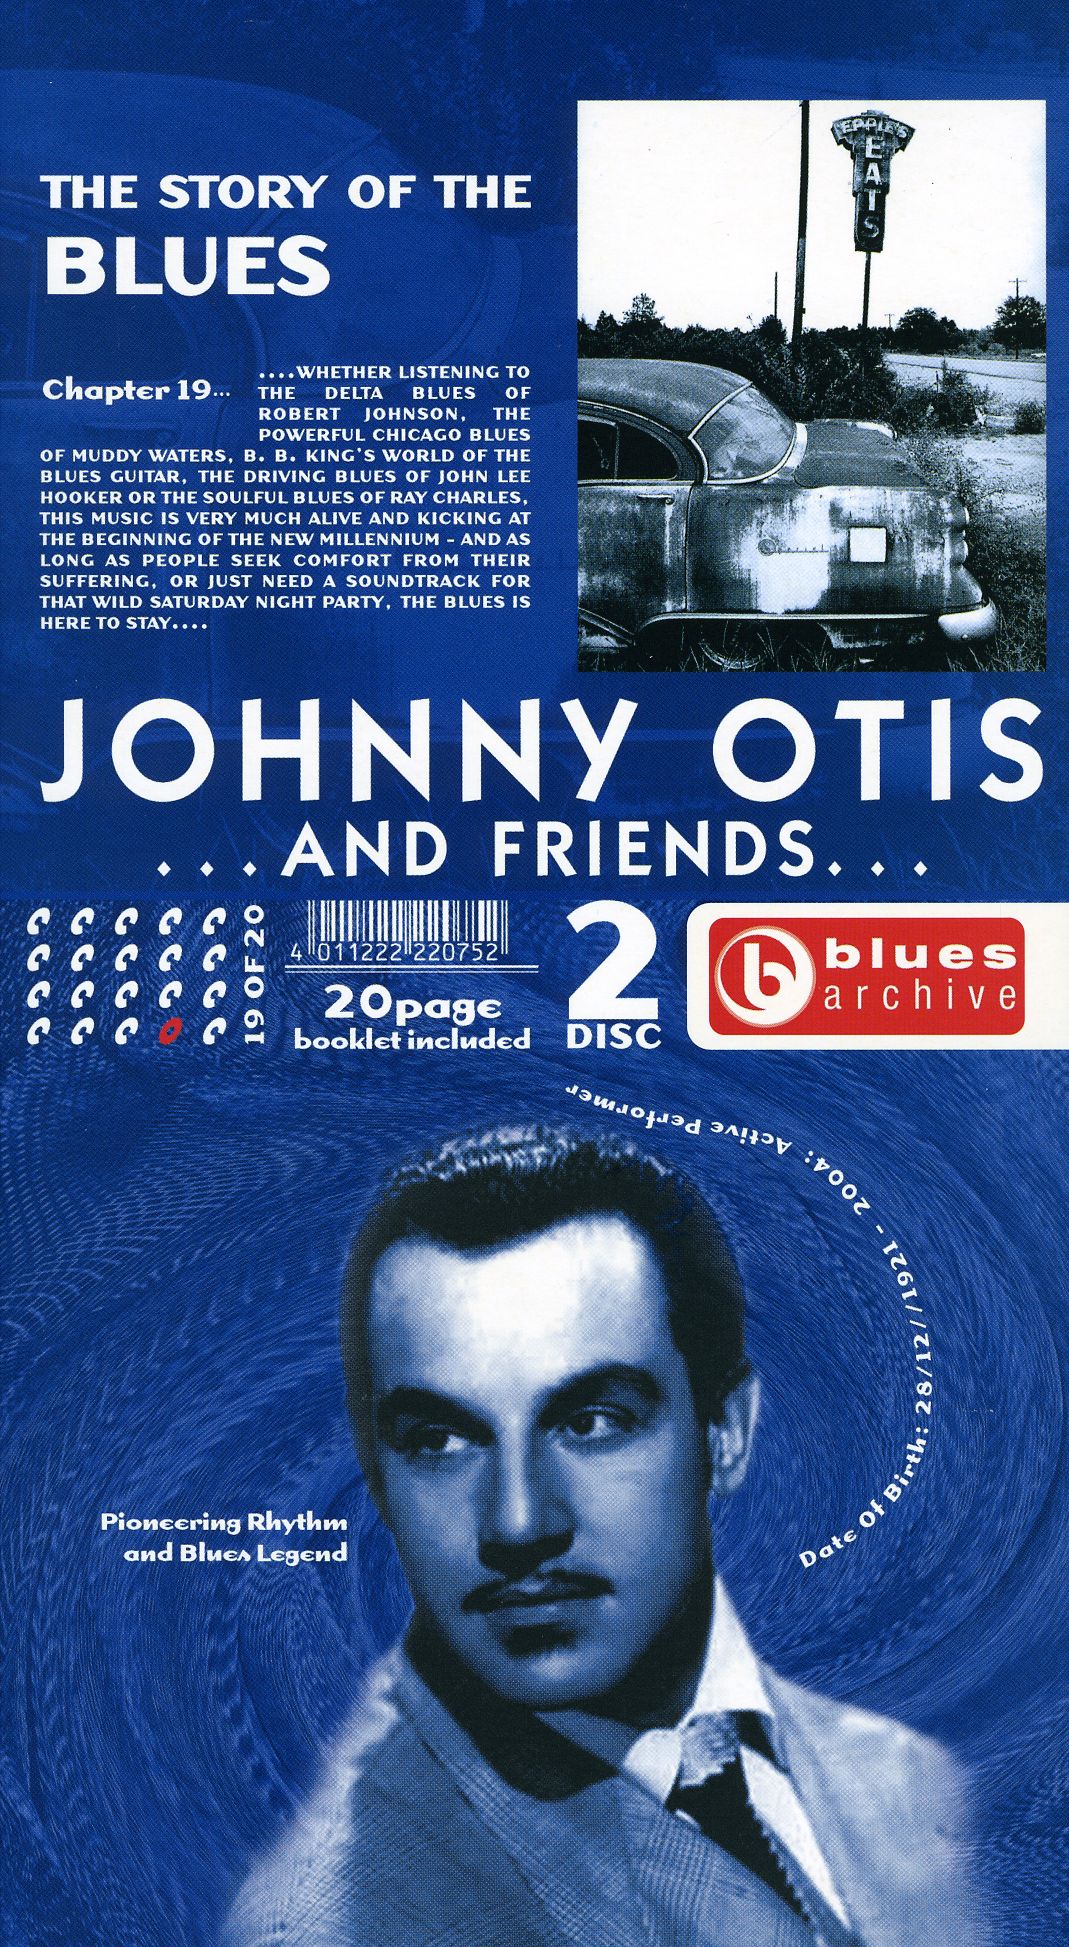 STORY OF THE BLUES: JOHNNY OTIS (CAN)